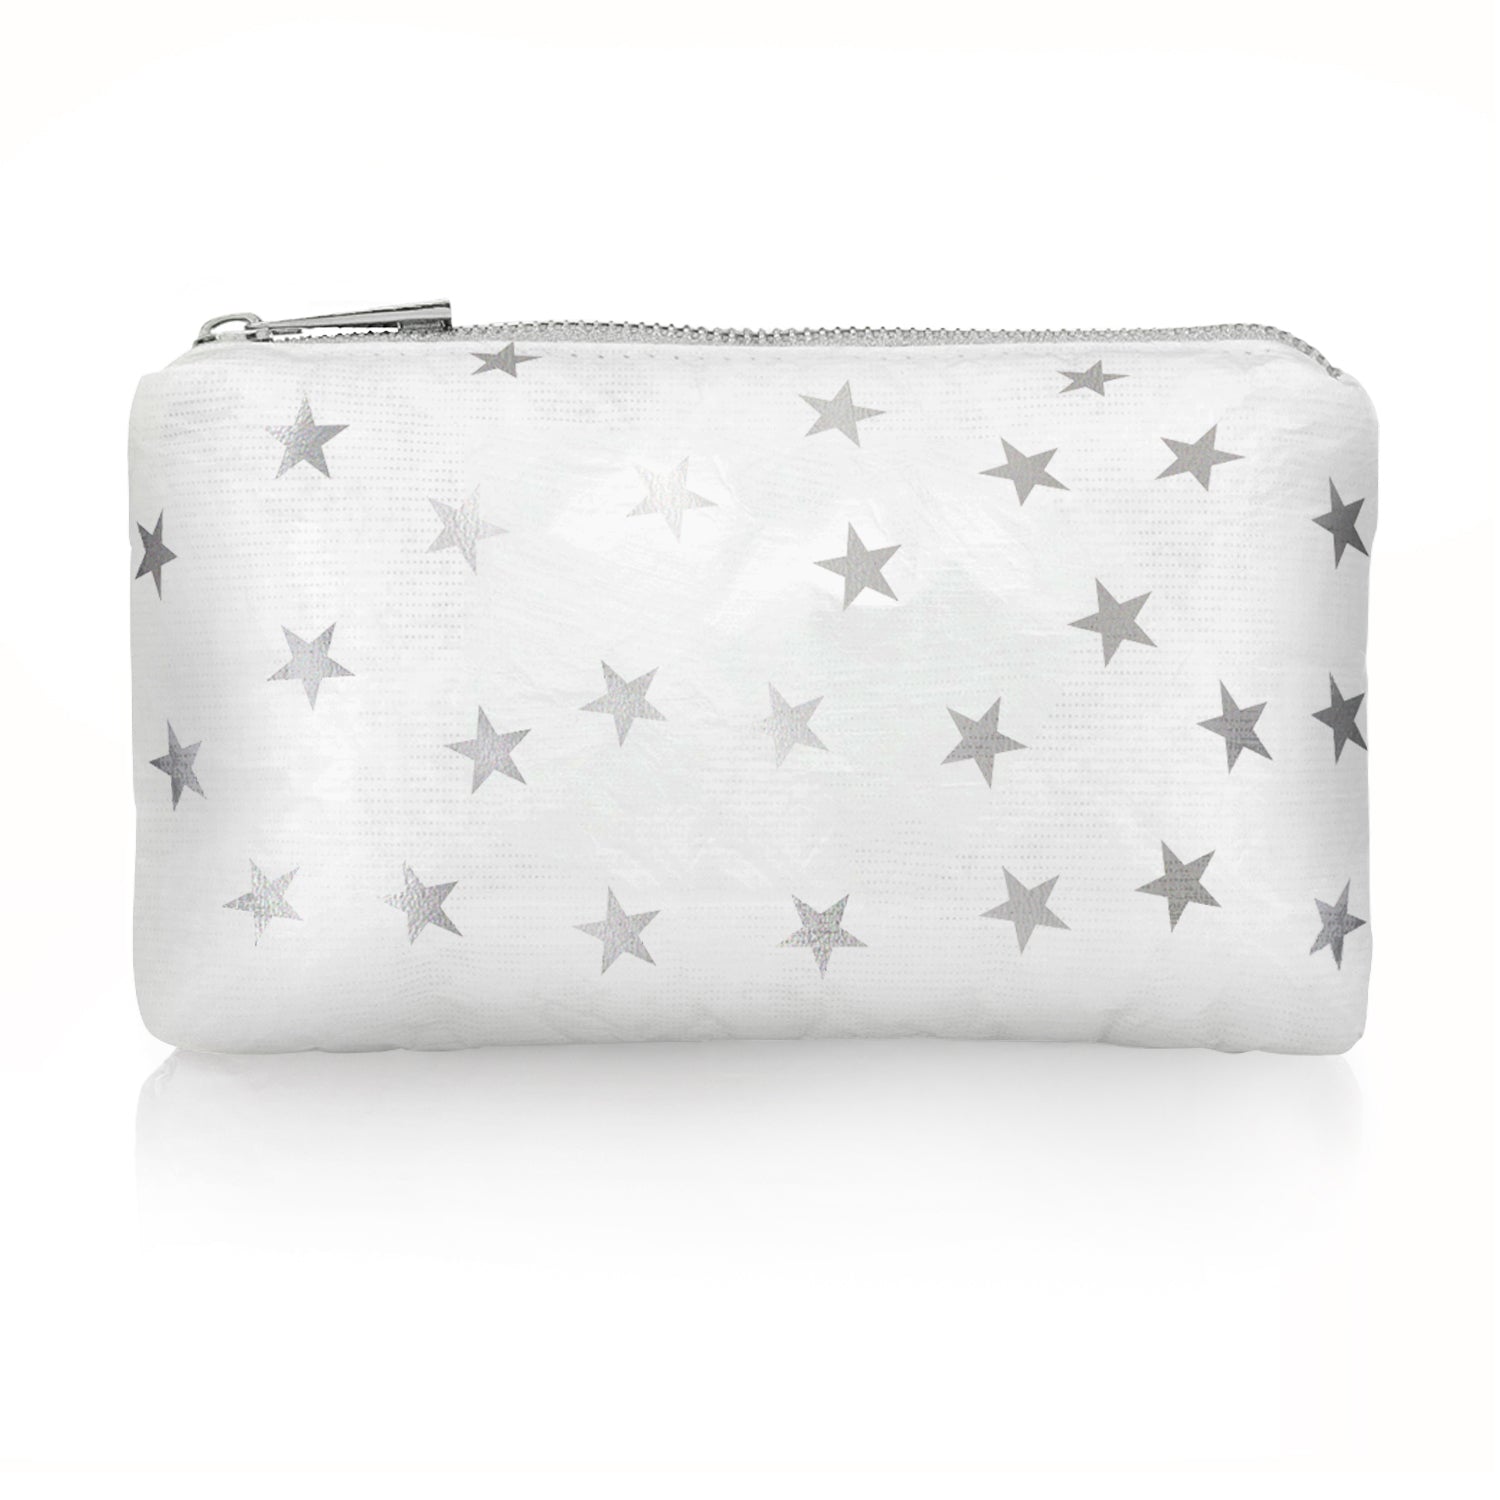 Mini Padded Zipper Pack in Shimmer White with Myriad Silver Stars